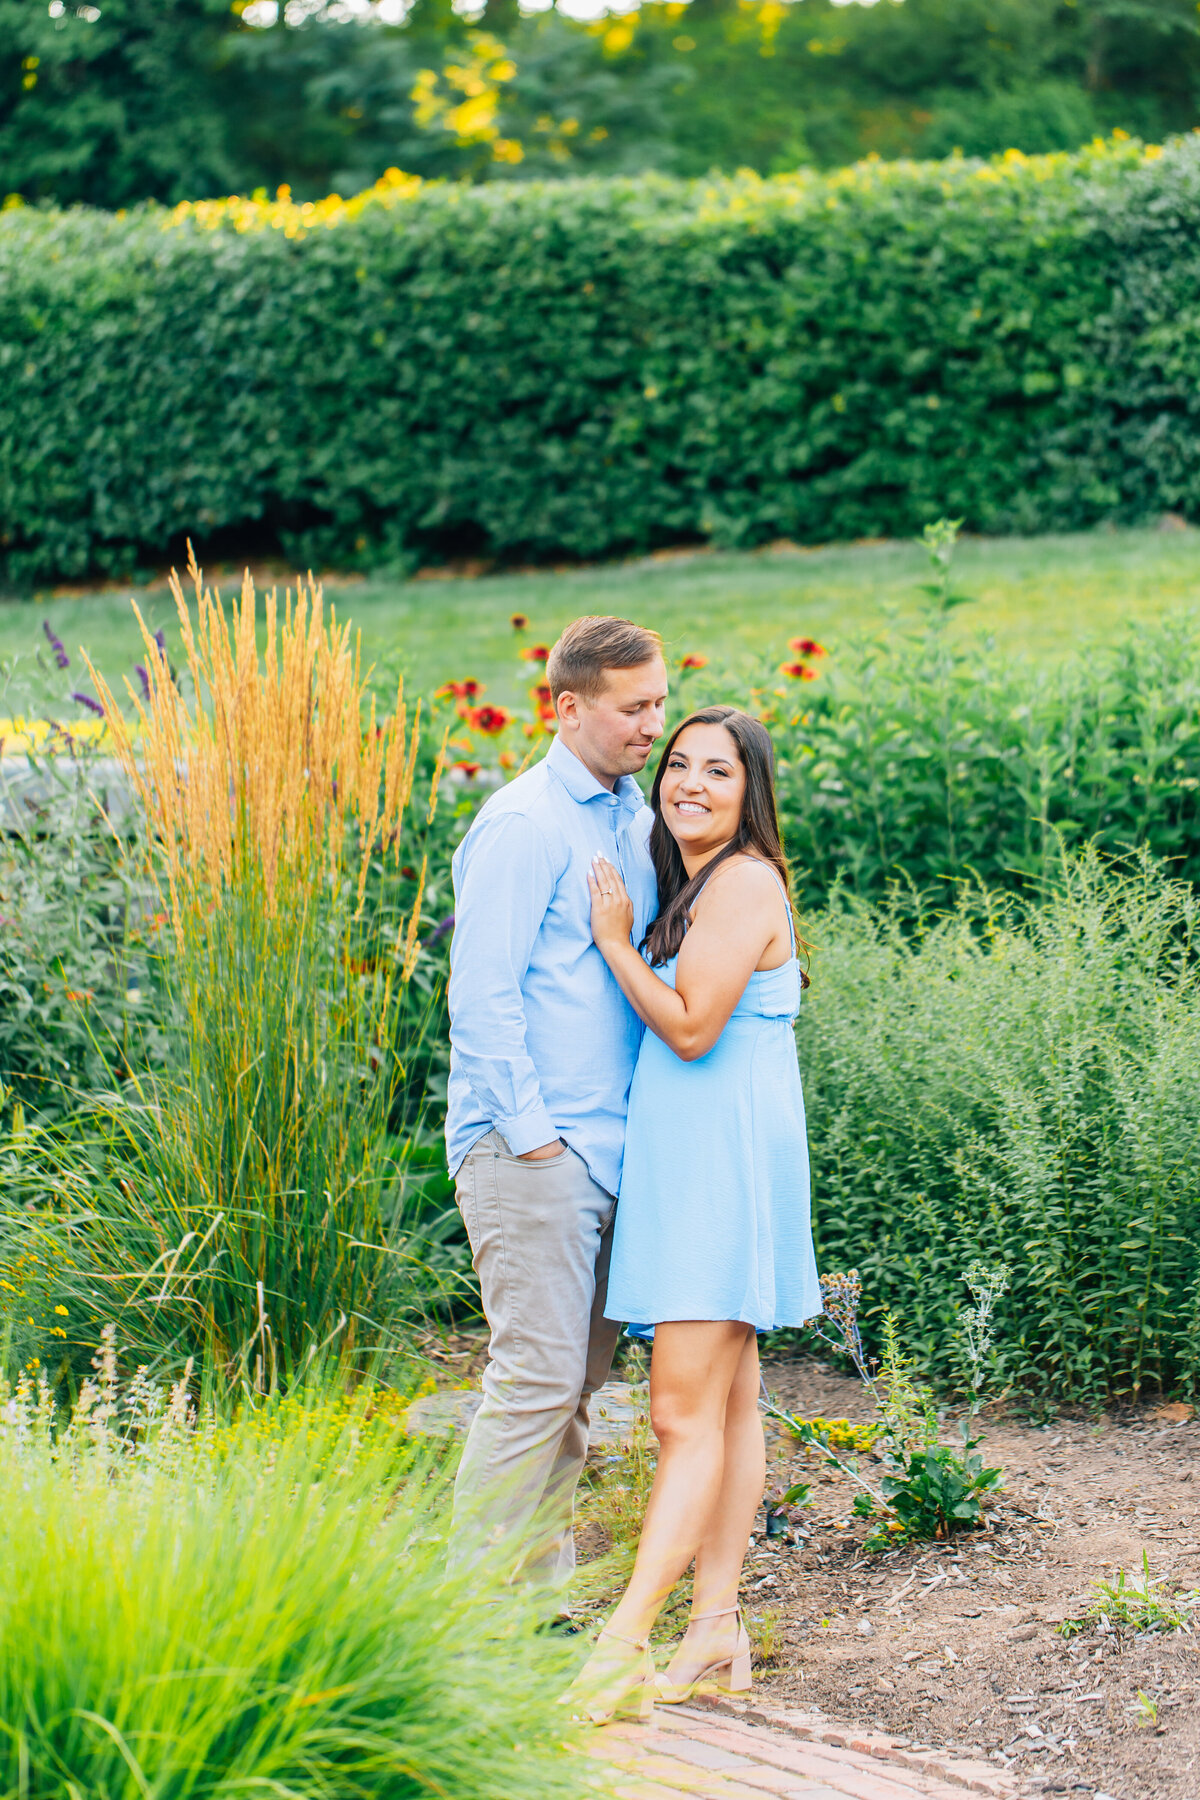 Jessica & Ryan Engagements at Biltmore Estate - Tracy Waldrop Photography-27